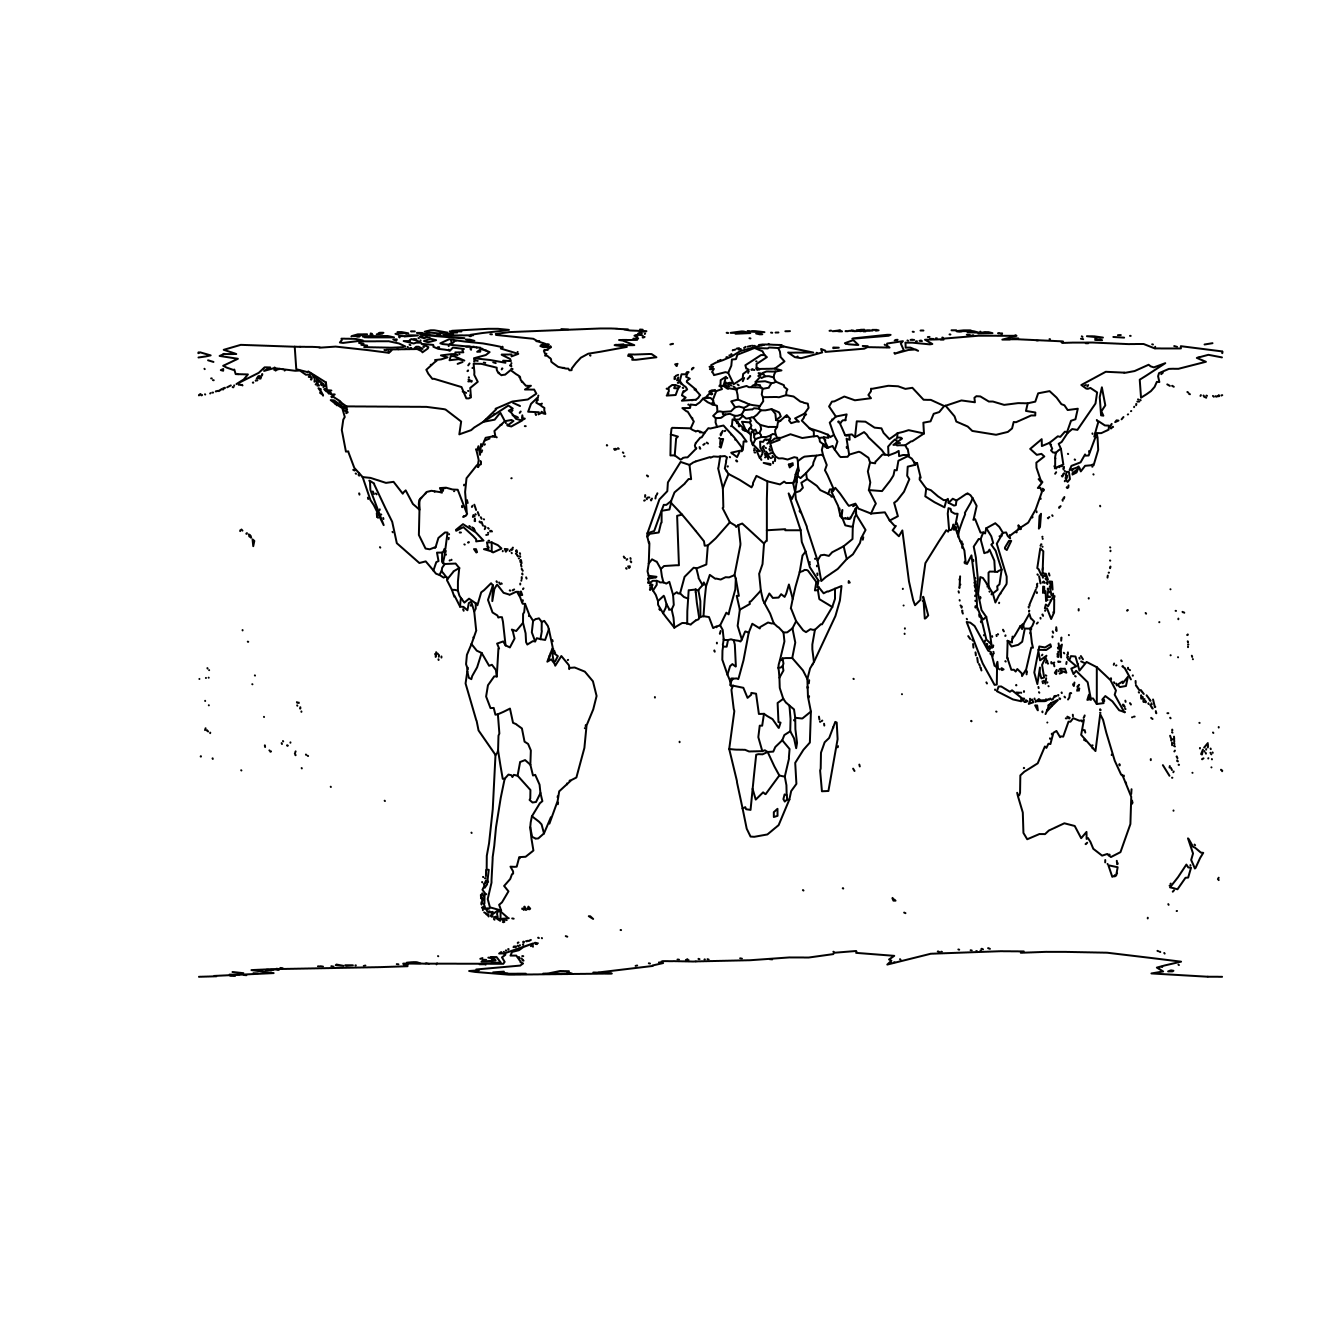 The world according to the Mercator (left) and Gall--Peters (right) projections.